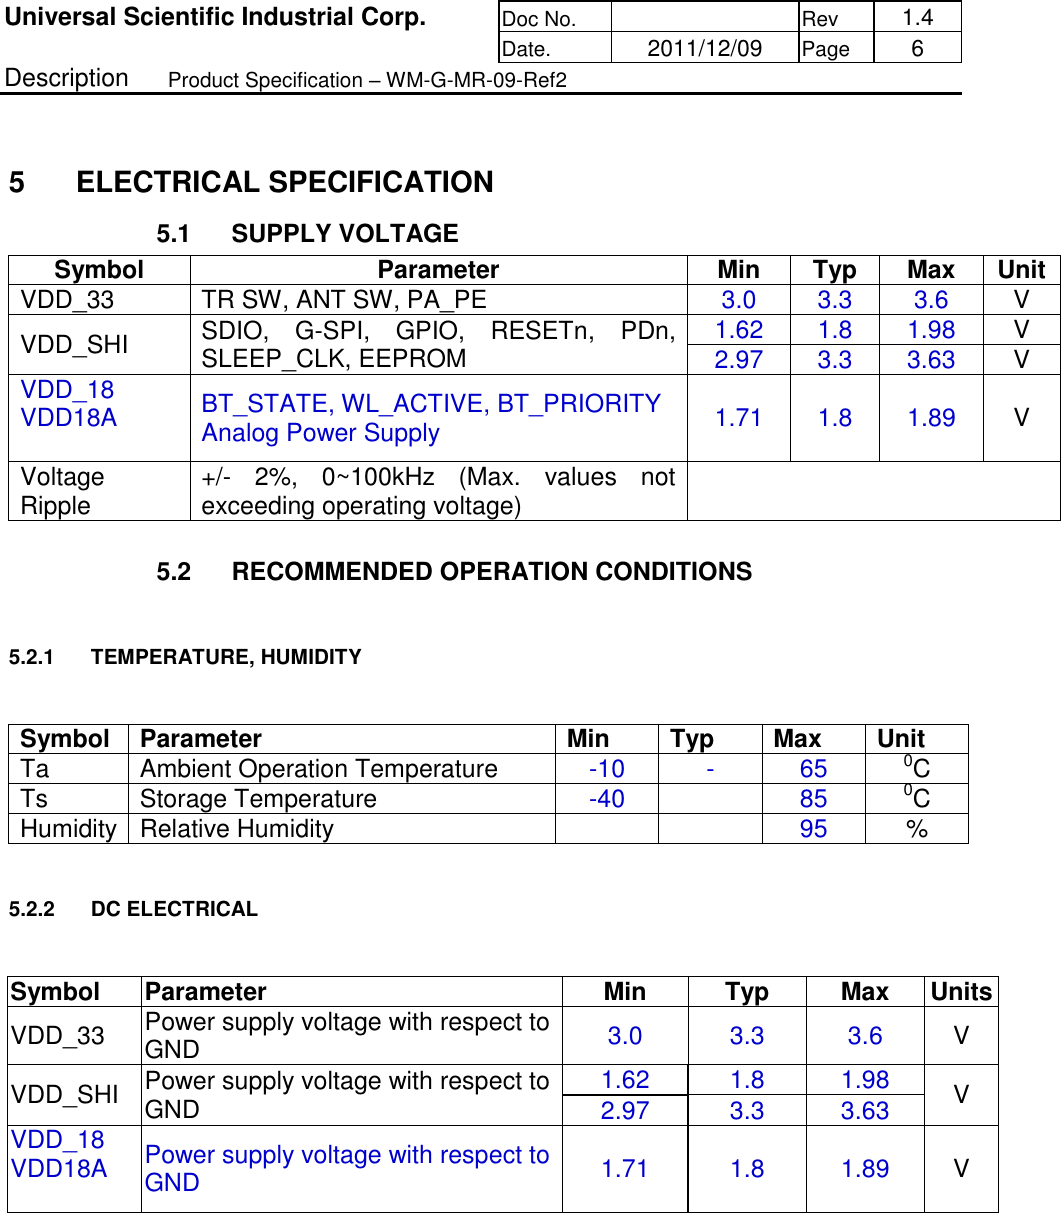 Universal Scientific Industrial Corp. Doc No.  Rev  1.4 Date.  2011/12/09 Page  6 Description  Product Specification – WM-G-MR-09-Ref2 5  ELECTRICAL SPECIFICATION 5.1  SUPPLY VOLTAGE Symbol  Parameter  Min  Typ  Max  Unit VDD_33  TR SW, ANT SW, PA_PE  3.0  3.3  3.6  V VDD_SHI  SDIO,  G-SPI,  GPIO,  RESETn,  PDn, SLEEP_CLK, EEPROM  1.62  1.8  1.98  V 2.97  3.3  3.63  V VDD_18 VDD18A  BT_STATE, WL_ACTIVE, BT_PRIORITY Analog Power Supply  1.71  1.8  1.89 V Voltage Ripple  +/-  2%,  0~100kHz  (Max.  values  not exceeding operating voltage) 5.2  RECOMMENDED OPERATION CONDITIONS 5.2.1  TEMPERATURE, HUMIDITY Symbol  Parameter  Min  Typ  Max  Unit Ta  Ambient Operation Temperature  -10  -  65 0C Ts  Storage Temperature  -40 85 0CHumidity  Relative Humidity  95 % 5.2.2  DC ELECTRICAL Symbol  Parameter  Min  Typ  Max  Units VDD_33 Power supply voltage with respect to GND  3.0  3.3  3.6  V VDD_SHI  Power supply voltage with respect to GND  1.62  1.8  1.98  V 2.97  3.3  3.63 VDD_18 VDD18A  Power supply voltage with respect to GND  1.71  1.8  1.89 V 